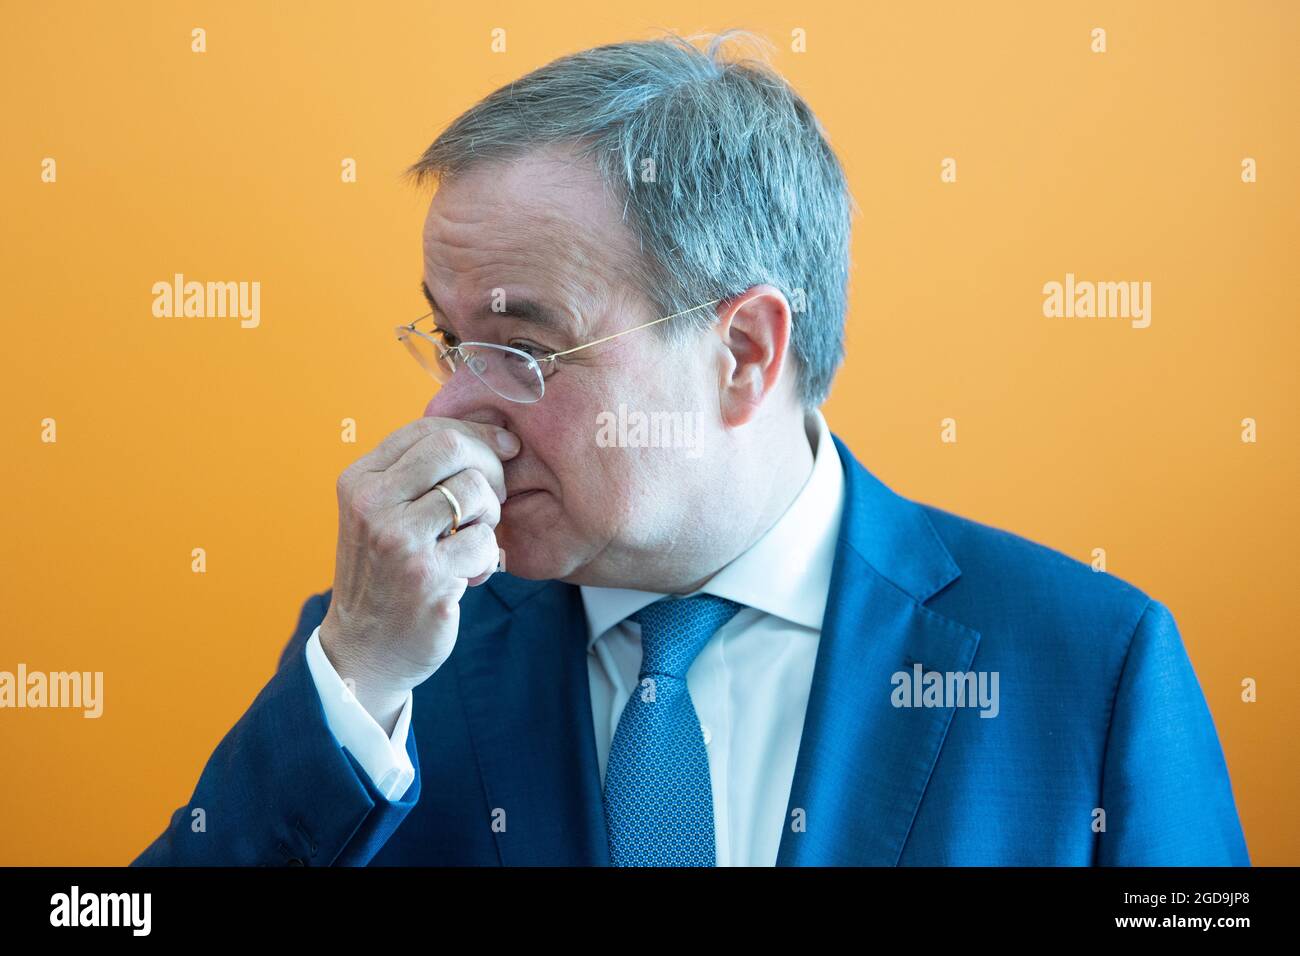 Dresden, Germany. 12th Aug, 2021. Armin Laschet, CDU Federal Chairman and Minister President of North Rhine-Westphalia, stands in the foyer during his visit to the factory of chip manufacturer Globalfoundries. Credit: Sebastian Kahnert/dpa-Zentralbild/POOL/dpa/Alamy Live News Stock Photo